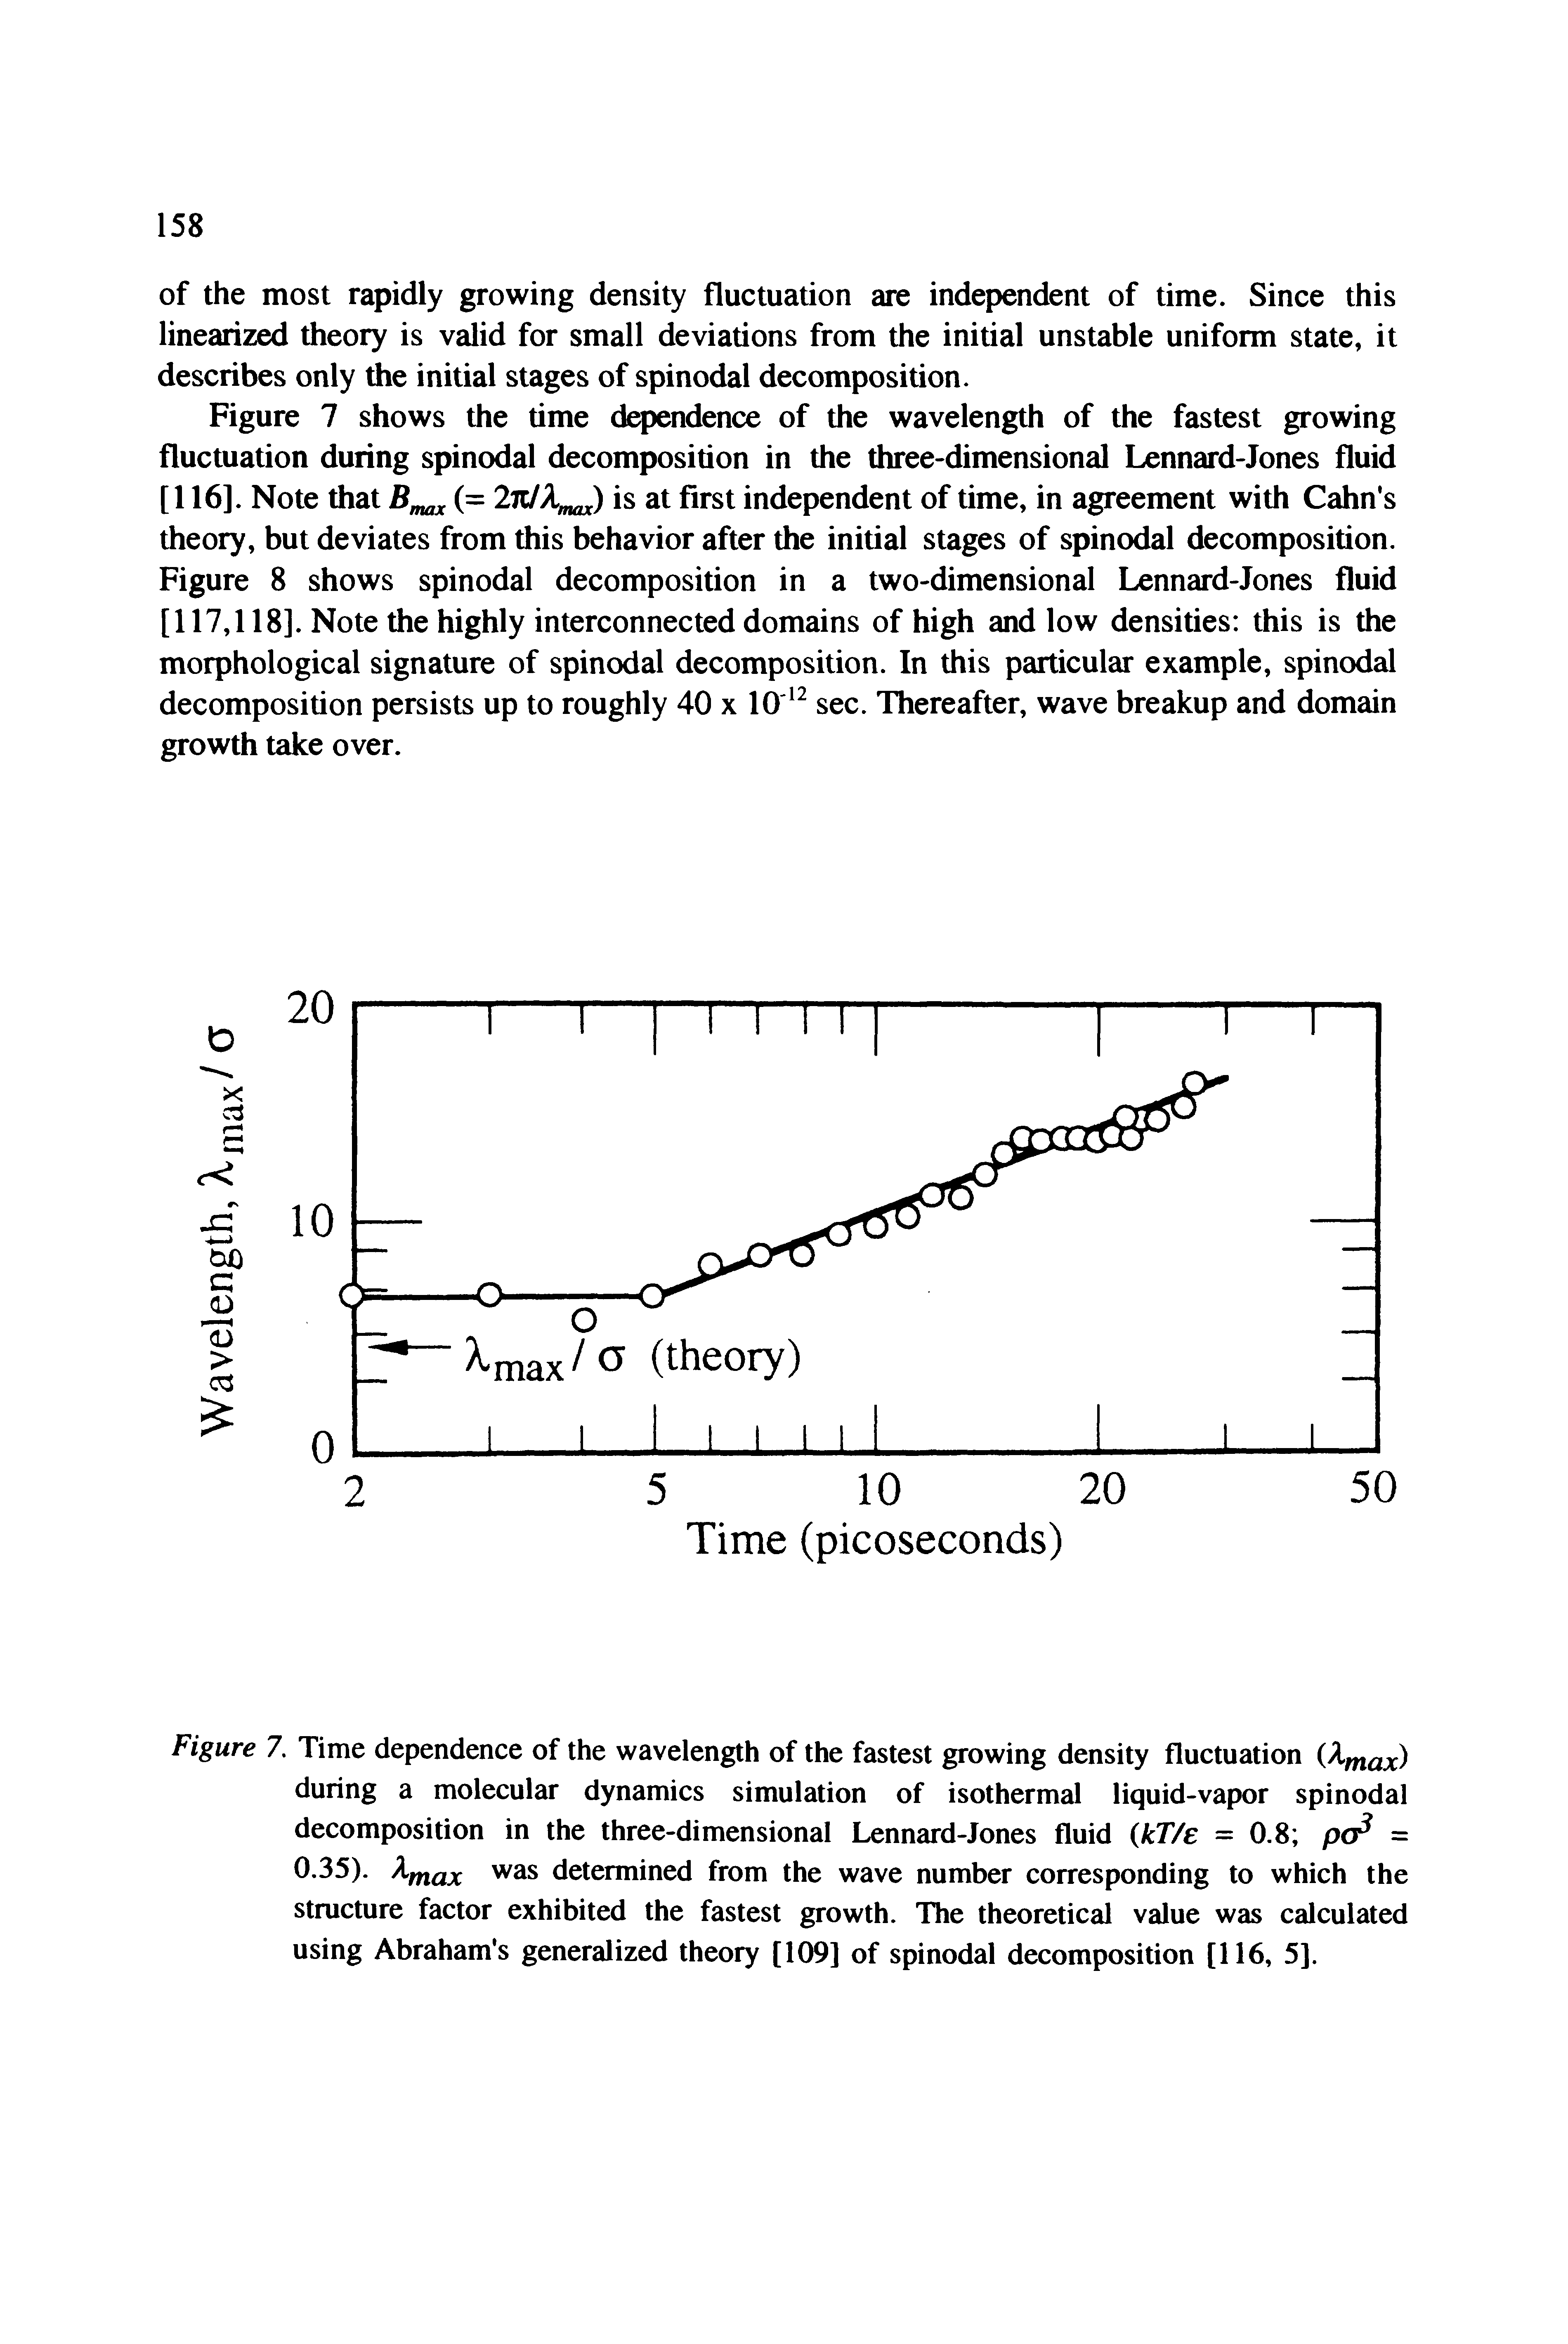 Figure 7. Time dependence of the wavelength of the fastest growing density fluctuation (Affiax) during a molecular dynamics simulation of isothermal liquid-vapor spinodal decomposition in the three-dimensional Lennard-Jones fluid kT/e = 0.8 p<r = 0.35). X ax determined from the wave number corresponding to which the structure factor exhibited the fastest growth. The theoretical value was calculated using Abraham s generalized theory [109] of spinodal decomposition [116, 5].